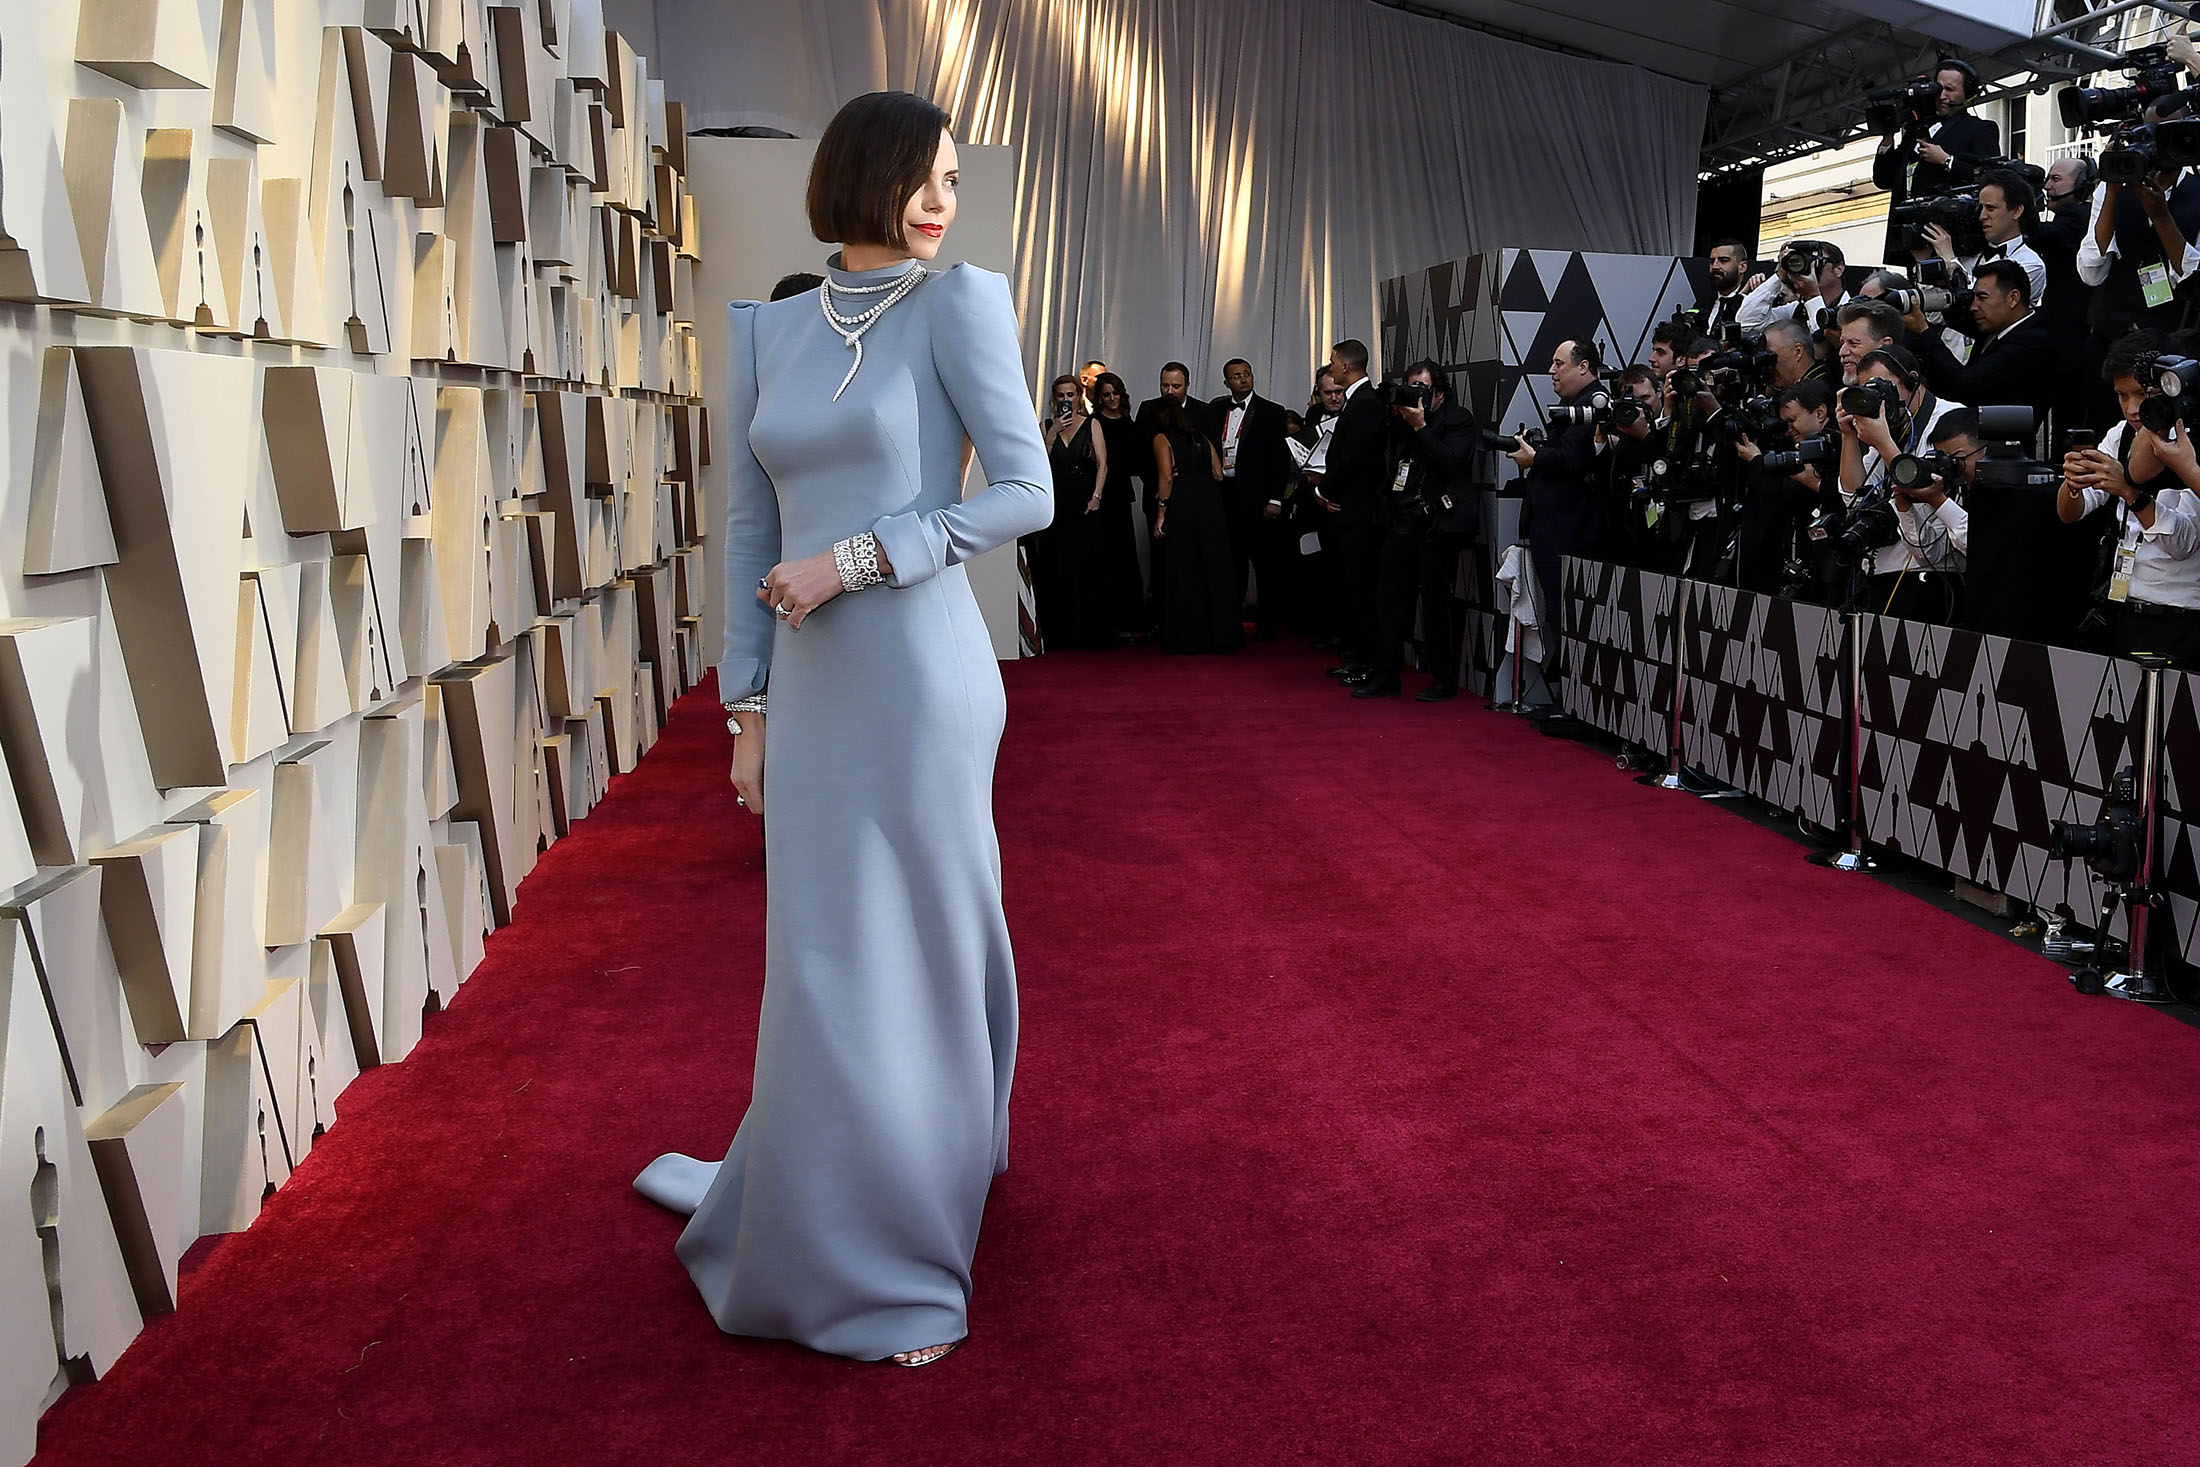 Oscars Red Carpet Is Mostly Fashion, With Only a Little Politics